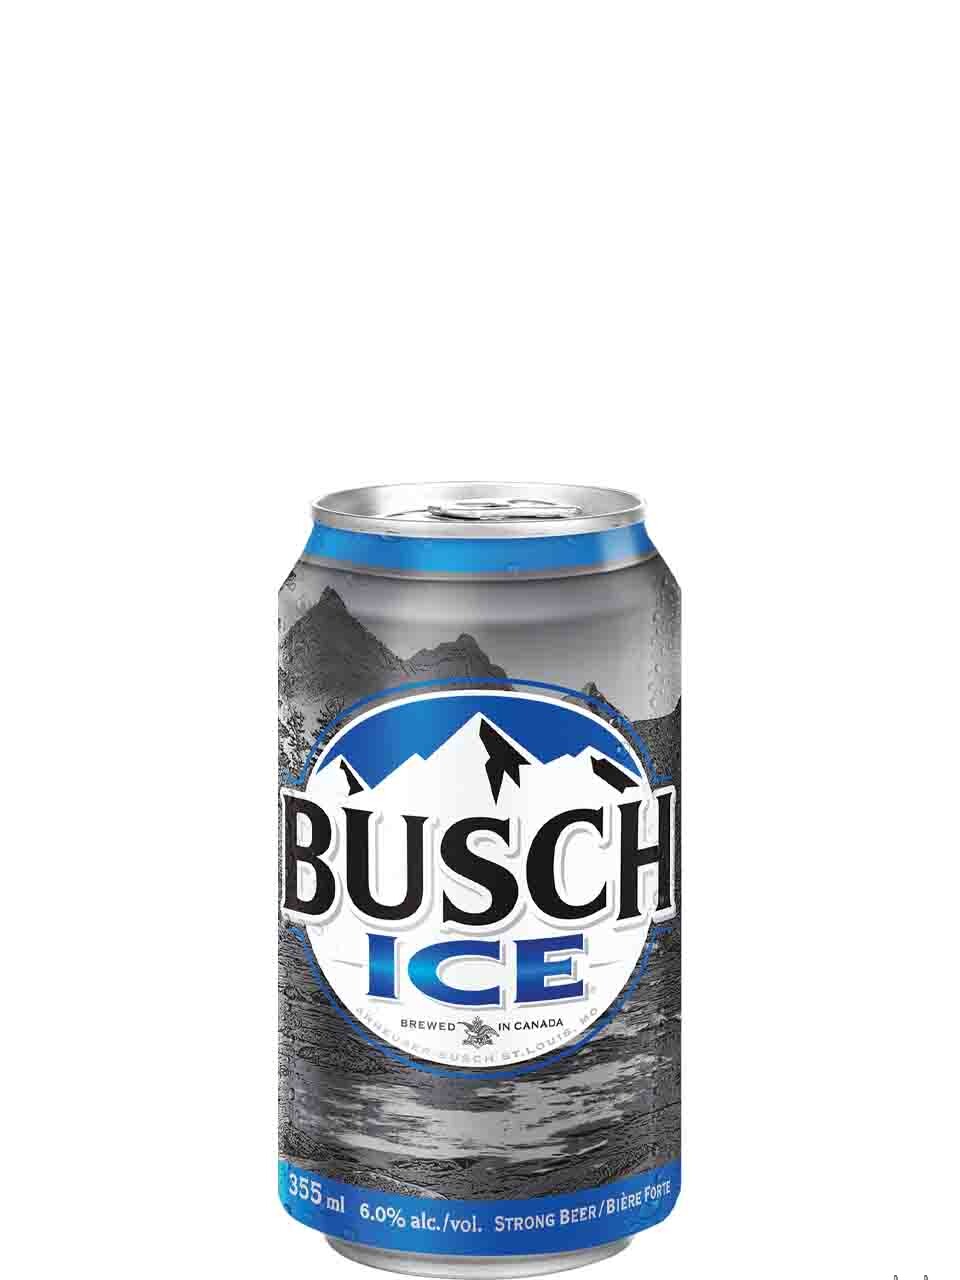 how much alcohol is in busch ice